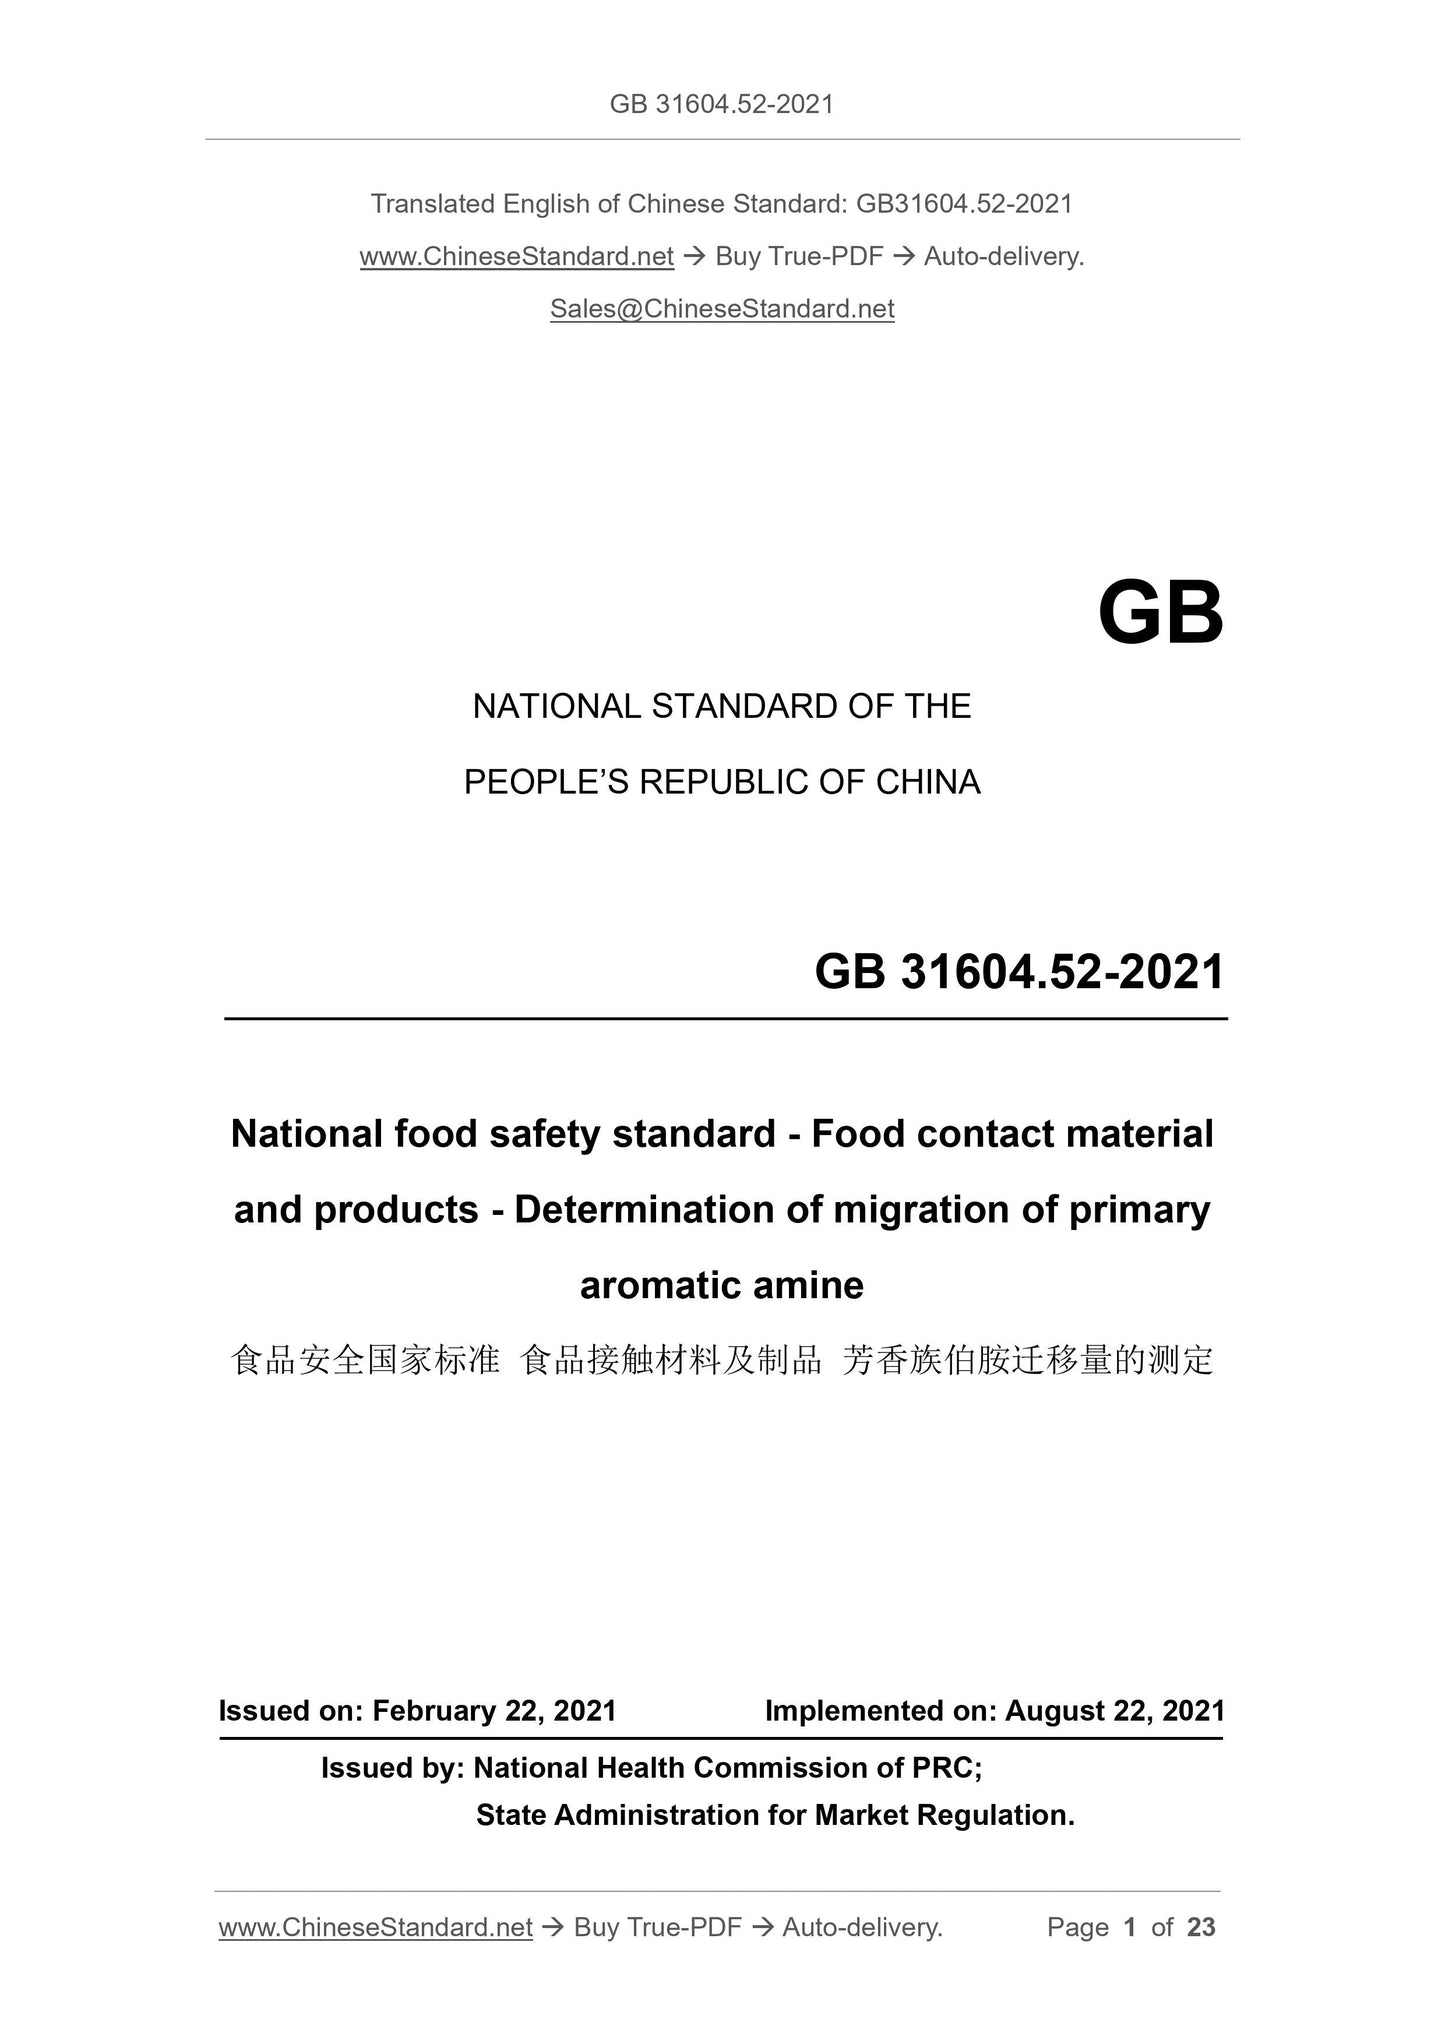 GB 31604.52-2021 Page 1